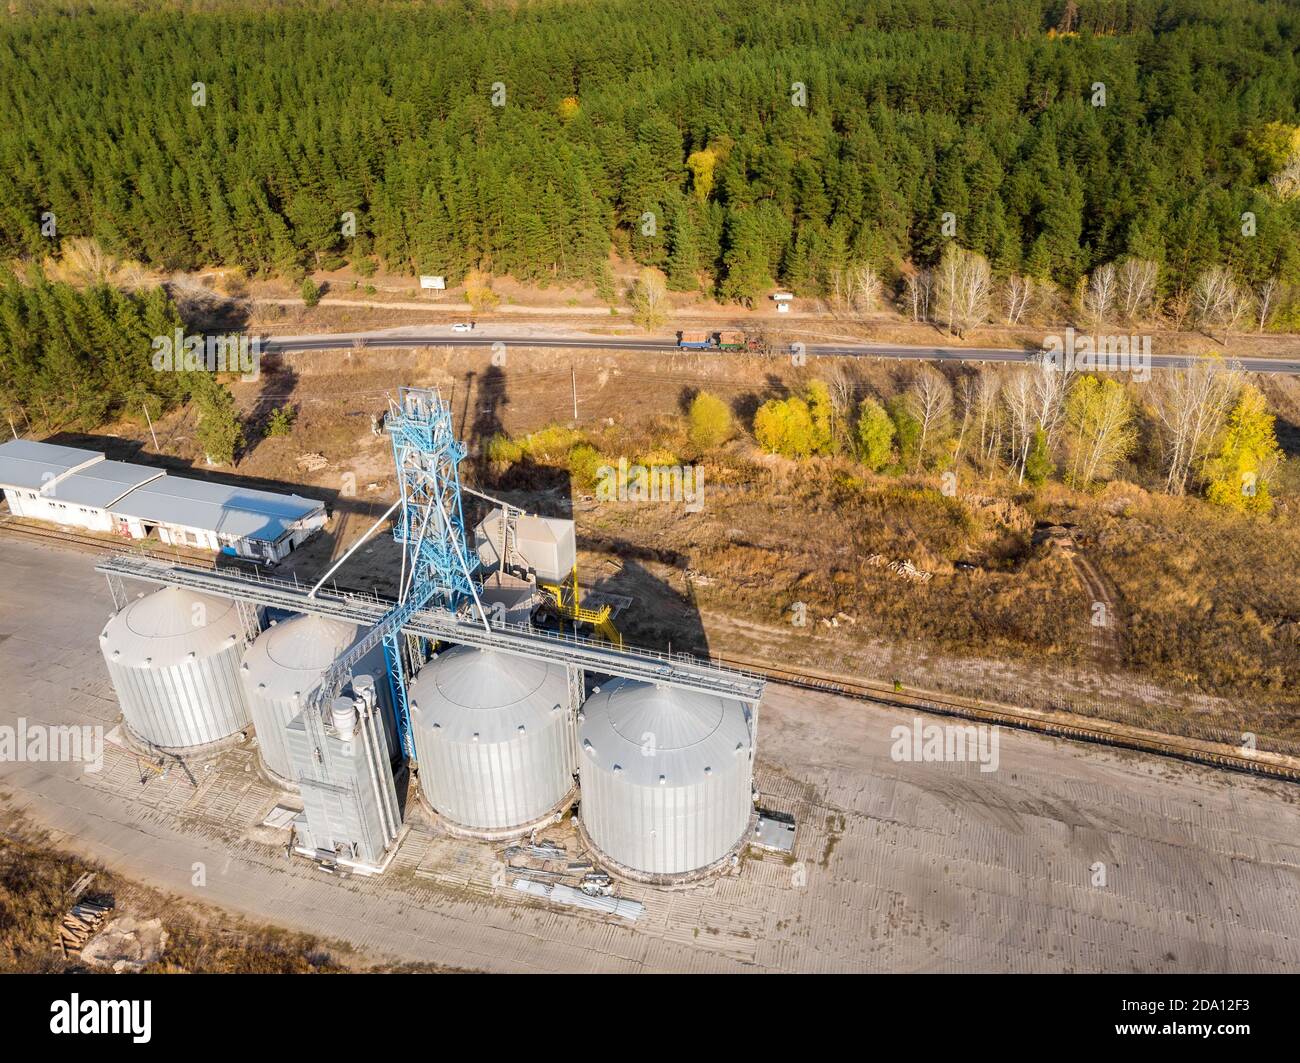 Aerial drone view modern steel agricultural grain granary silos cereal storage warehouse loading cargo grain carrier sunset. Agribuisness farmland Stock Photo